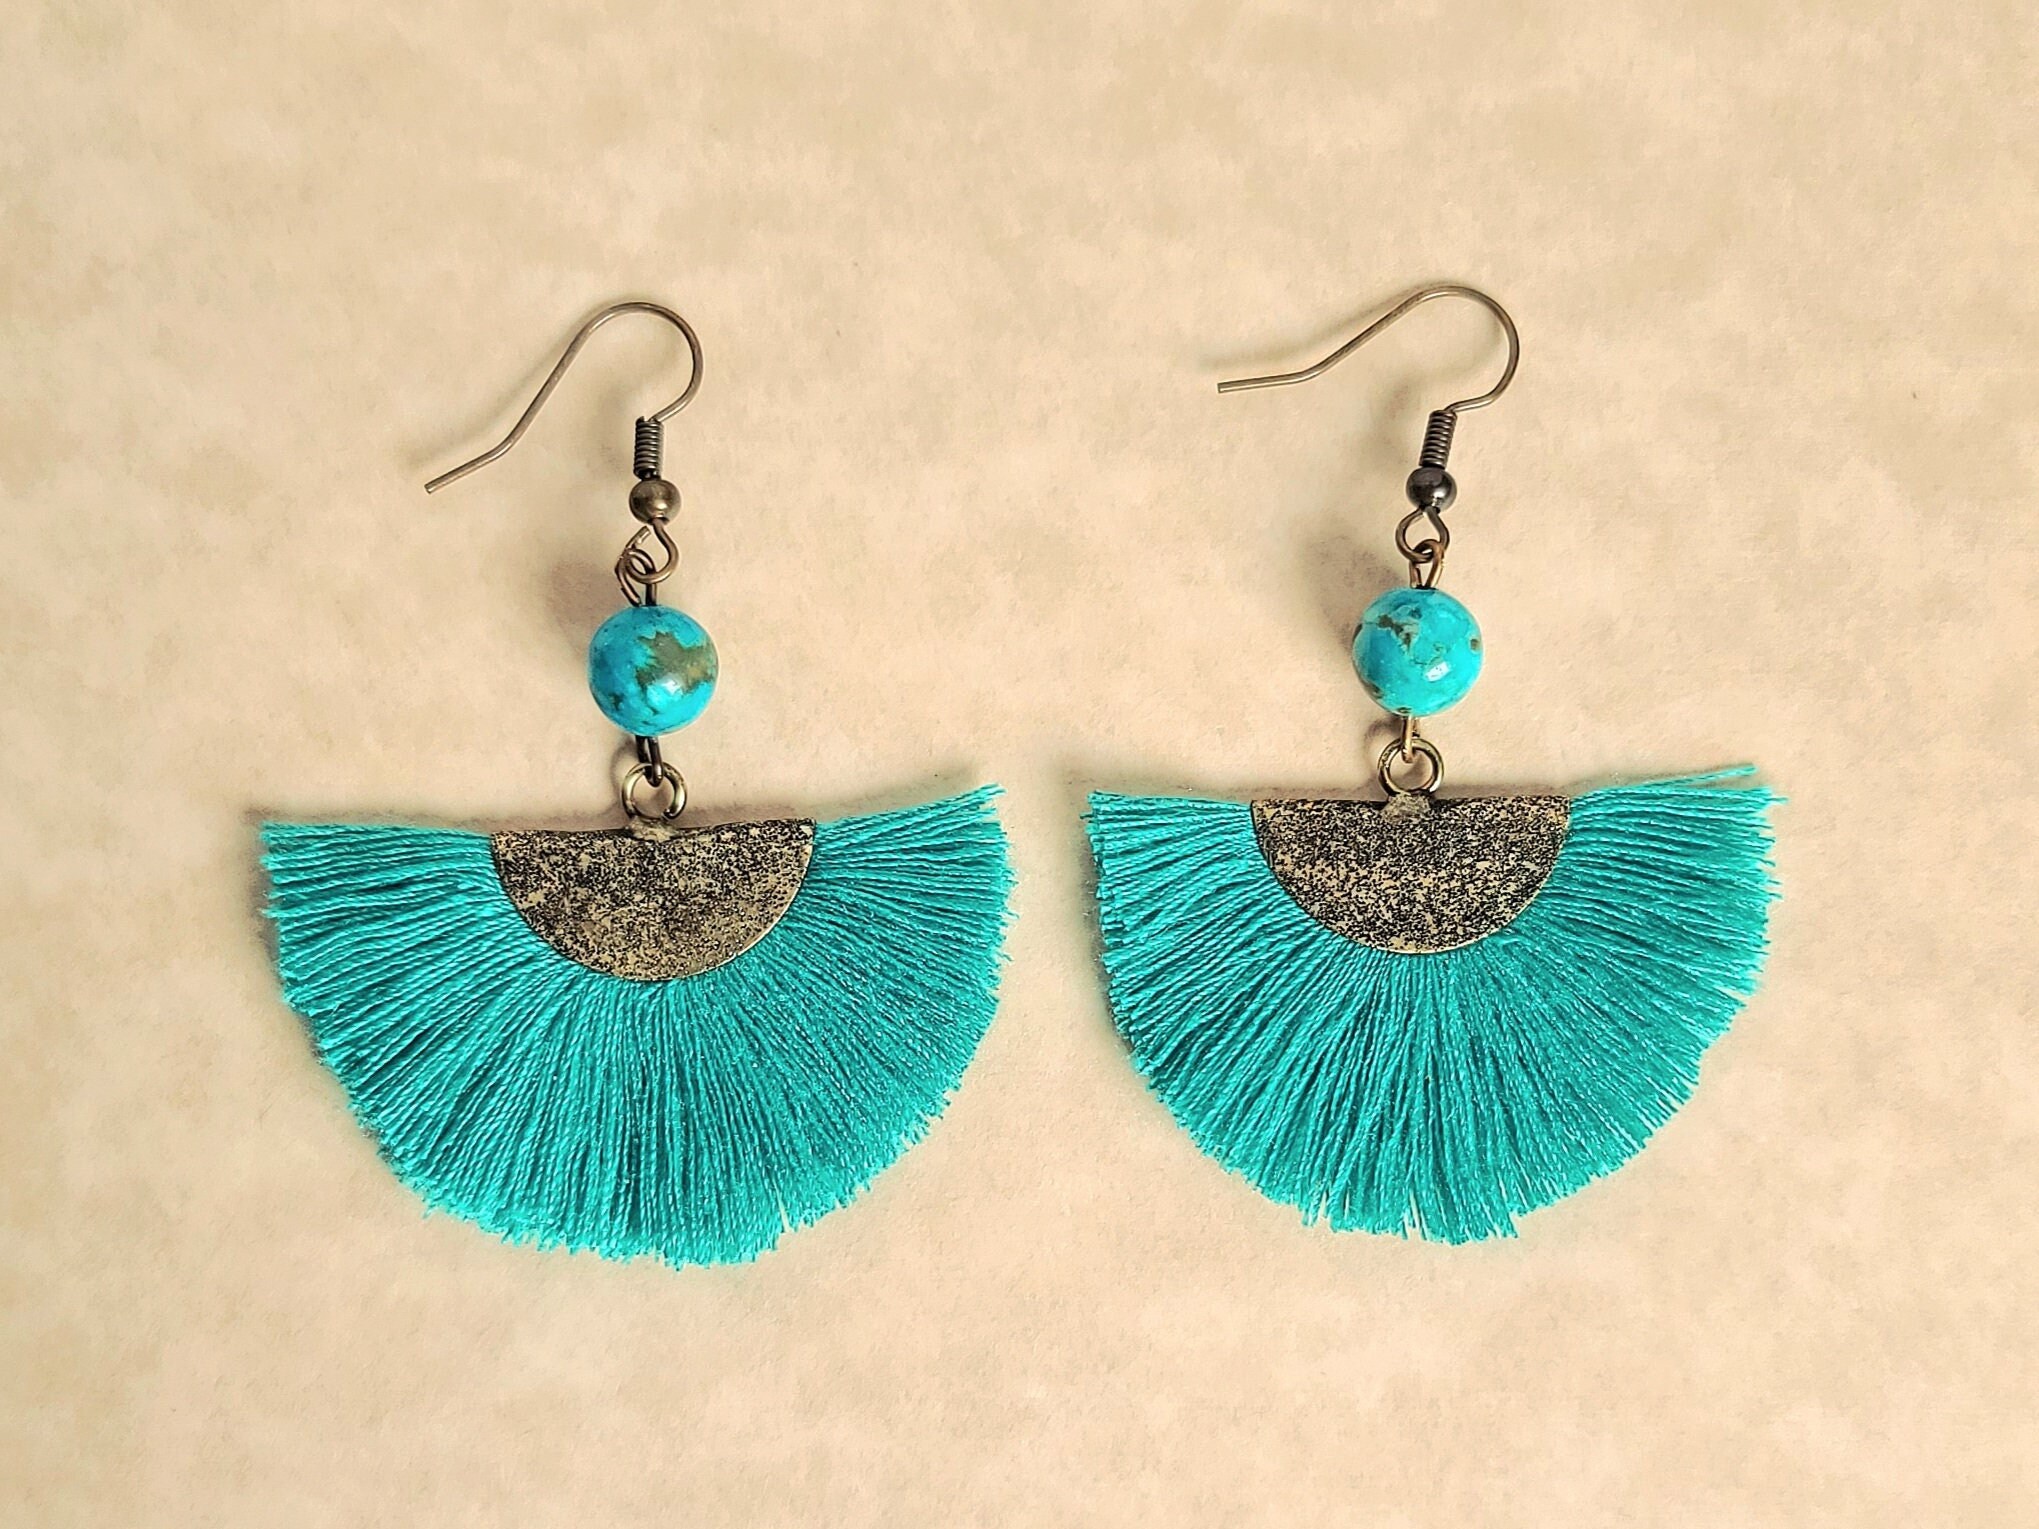 ayan creation handmade 3 layer thread dark blue  blue and sky blue tassel  earring for women  combo  at Best Price  120 with many options Only in  India at MartAvenuecom  Mart Avenue  MartAvenue